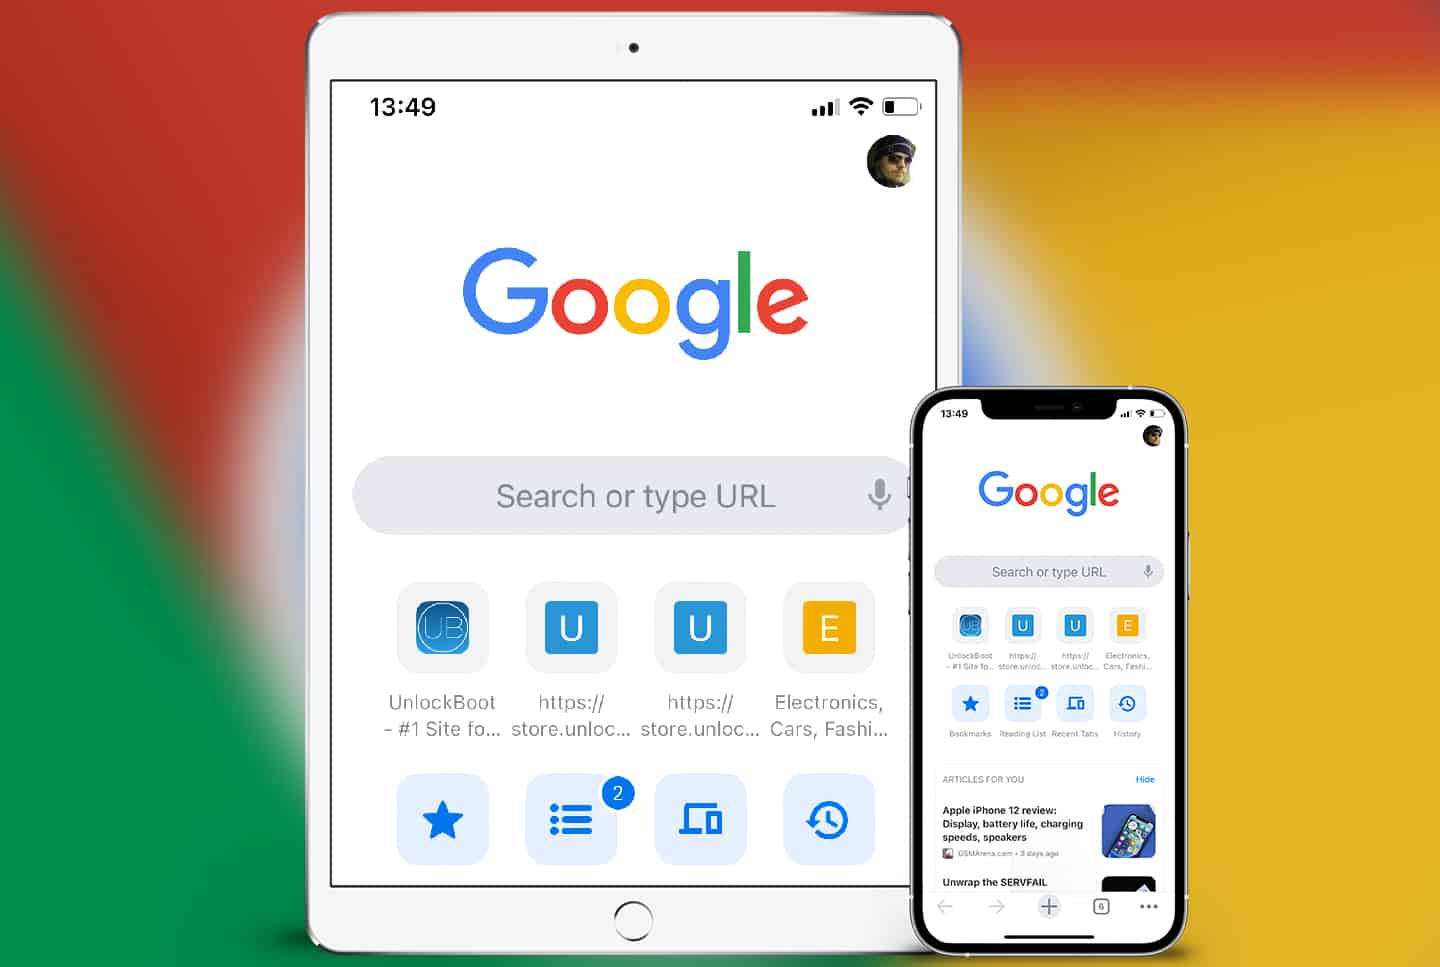 set chrome as default browser on iphone